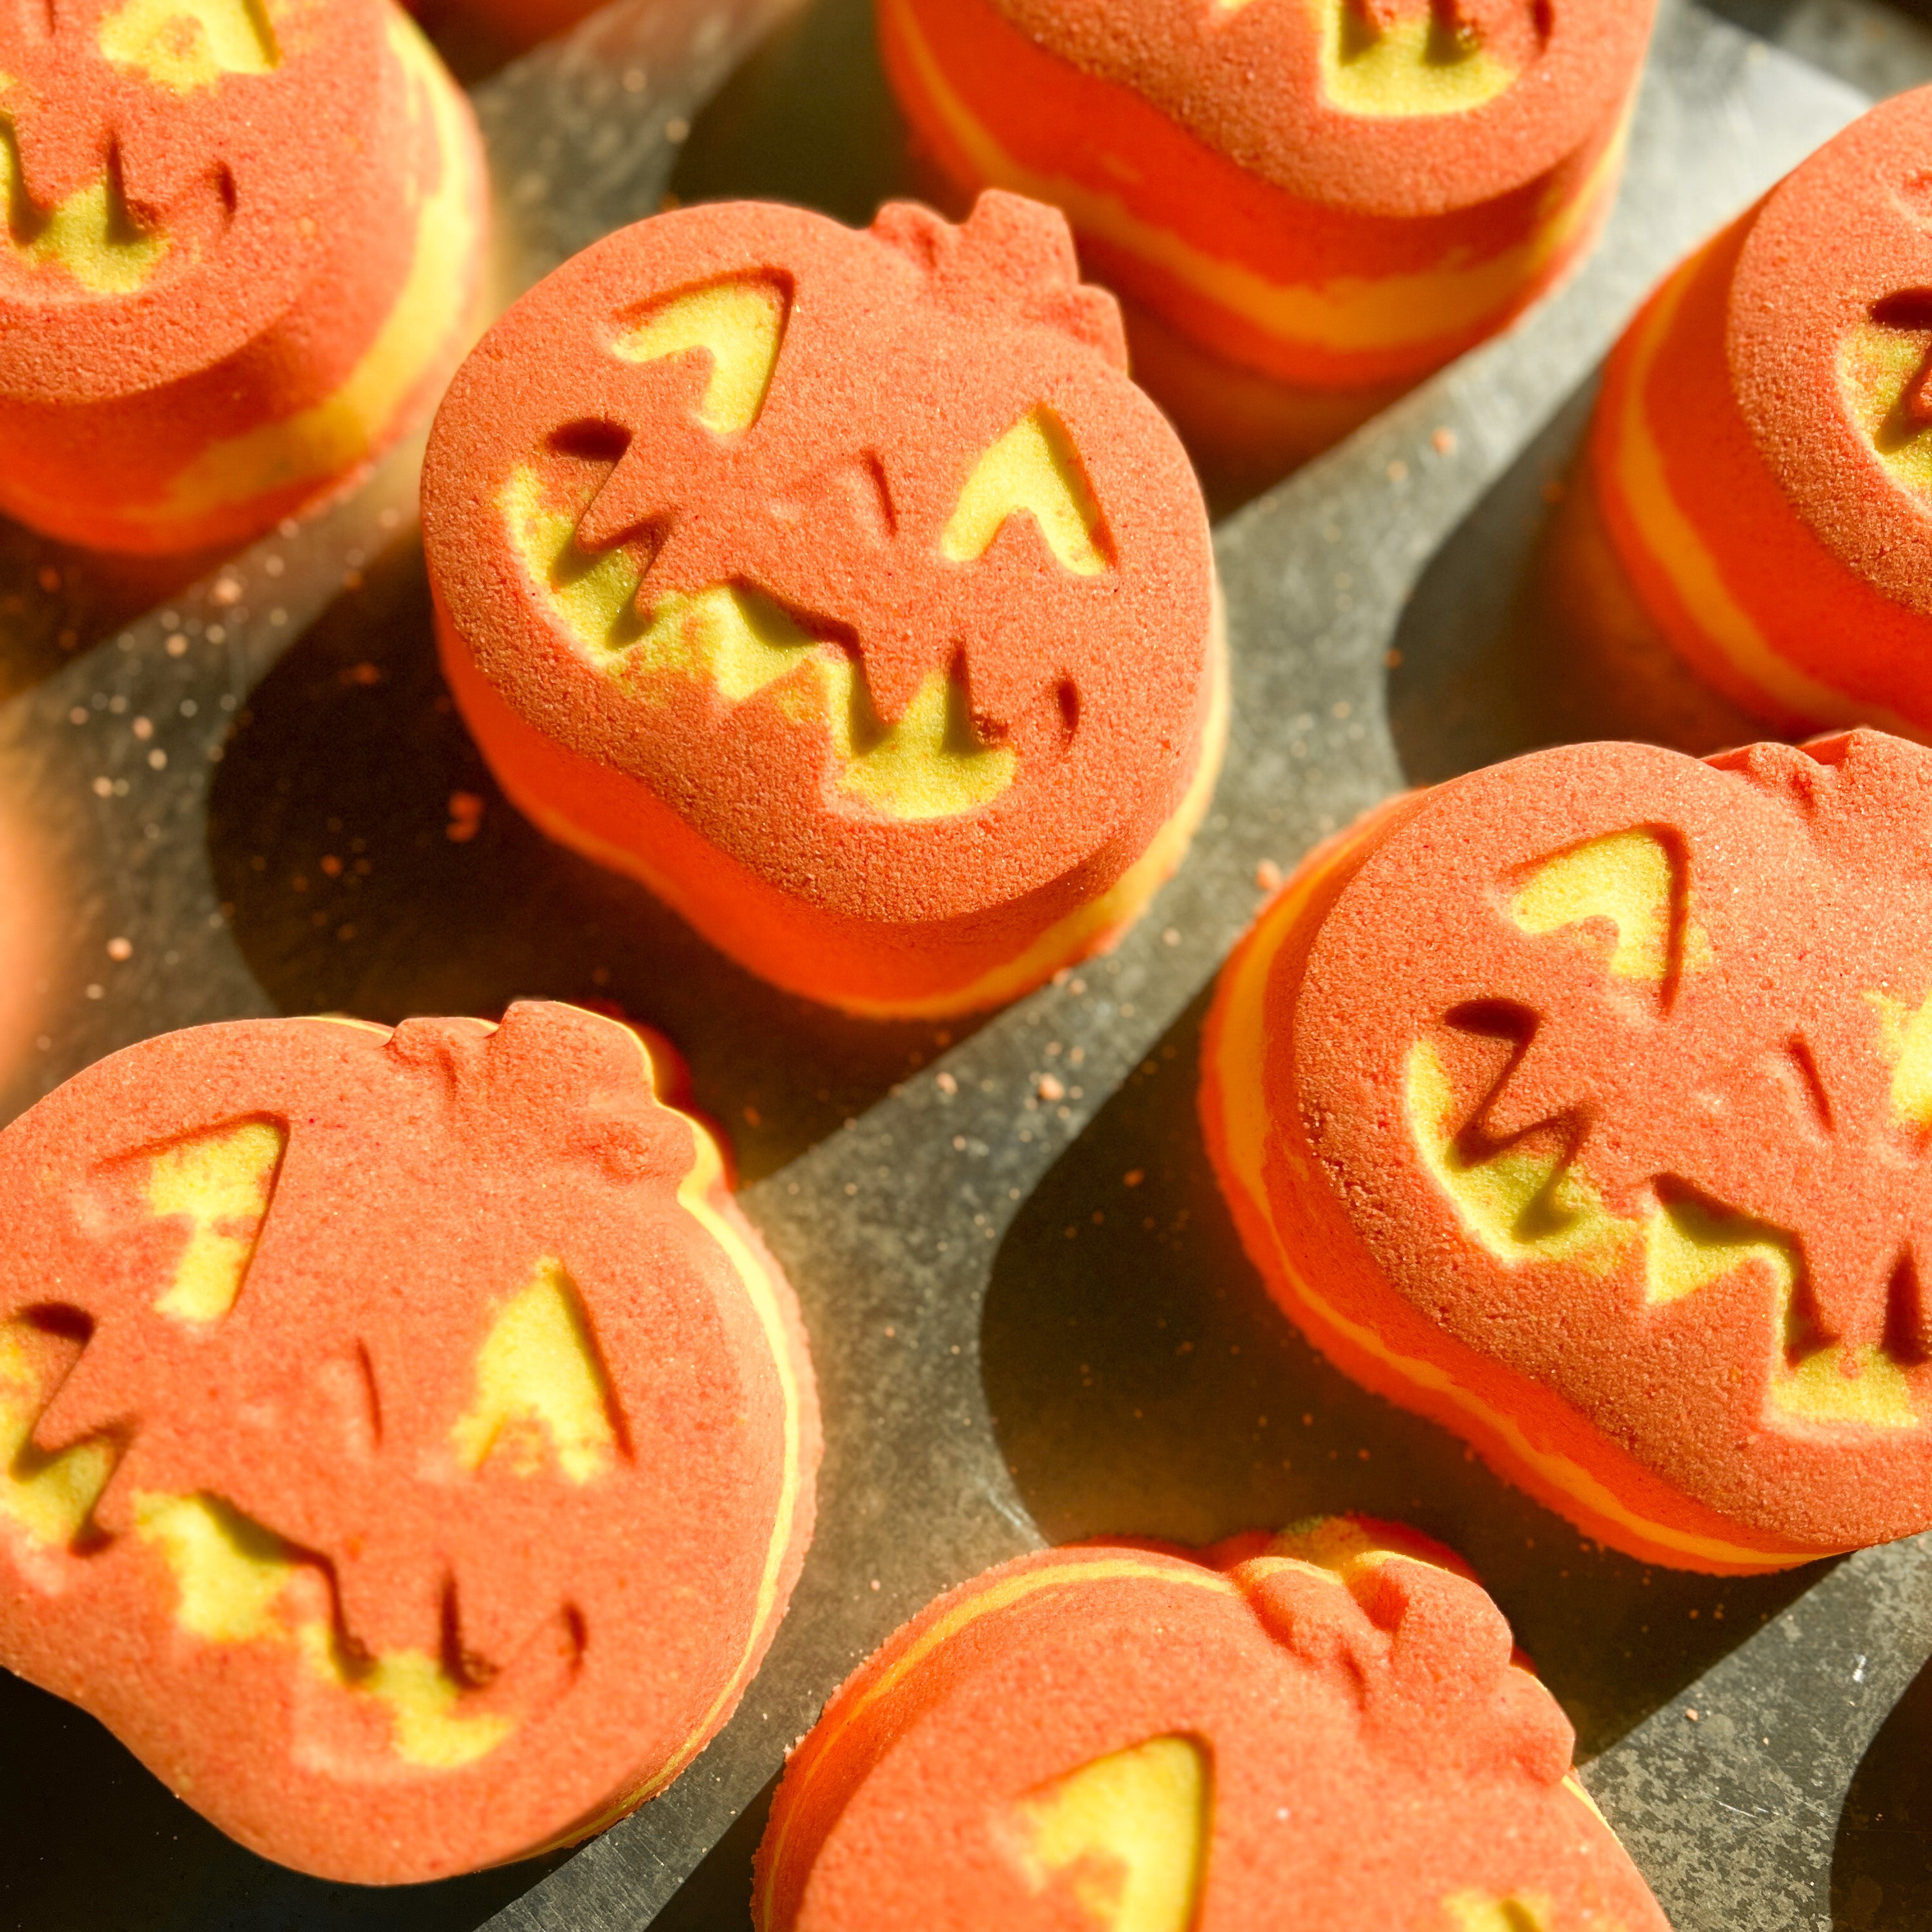 Our New Halloween Bath Bombs will get you into the spooky spirit 🎃